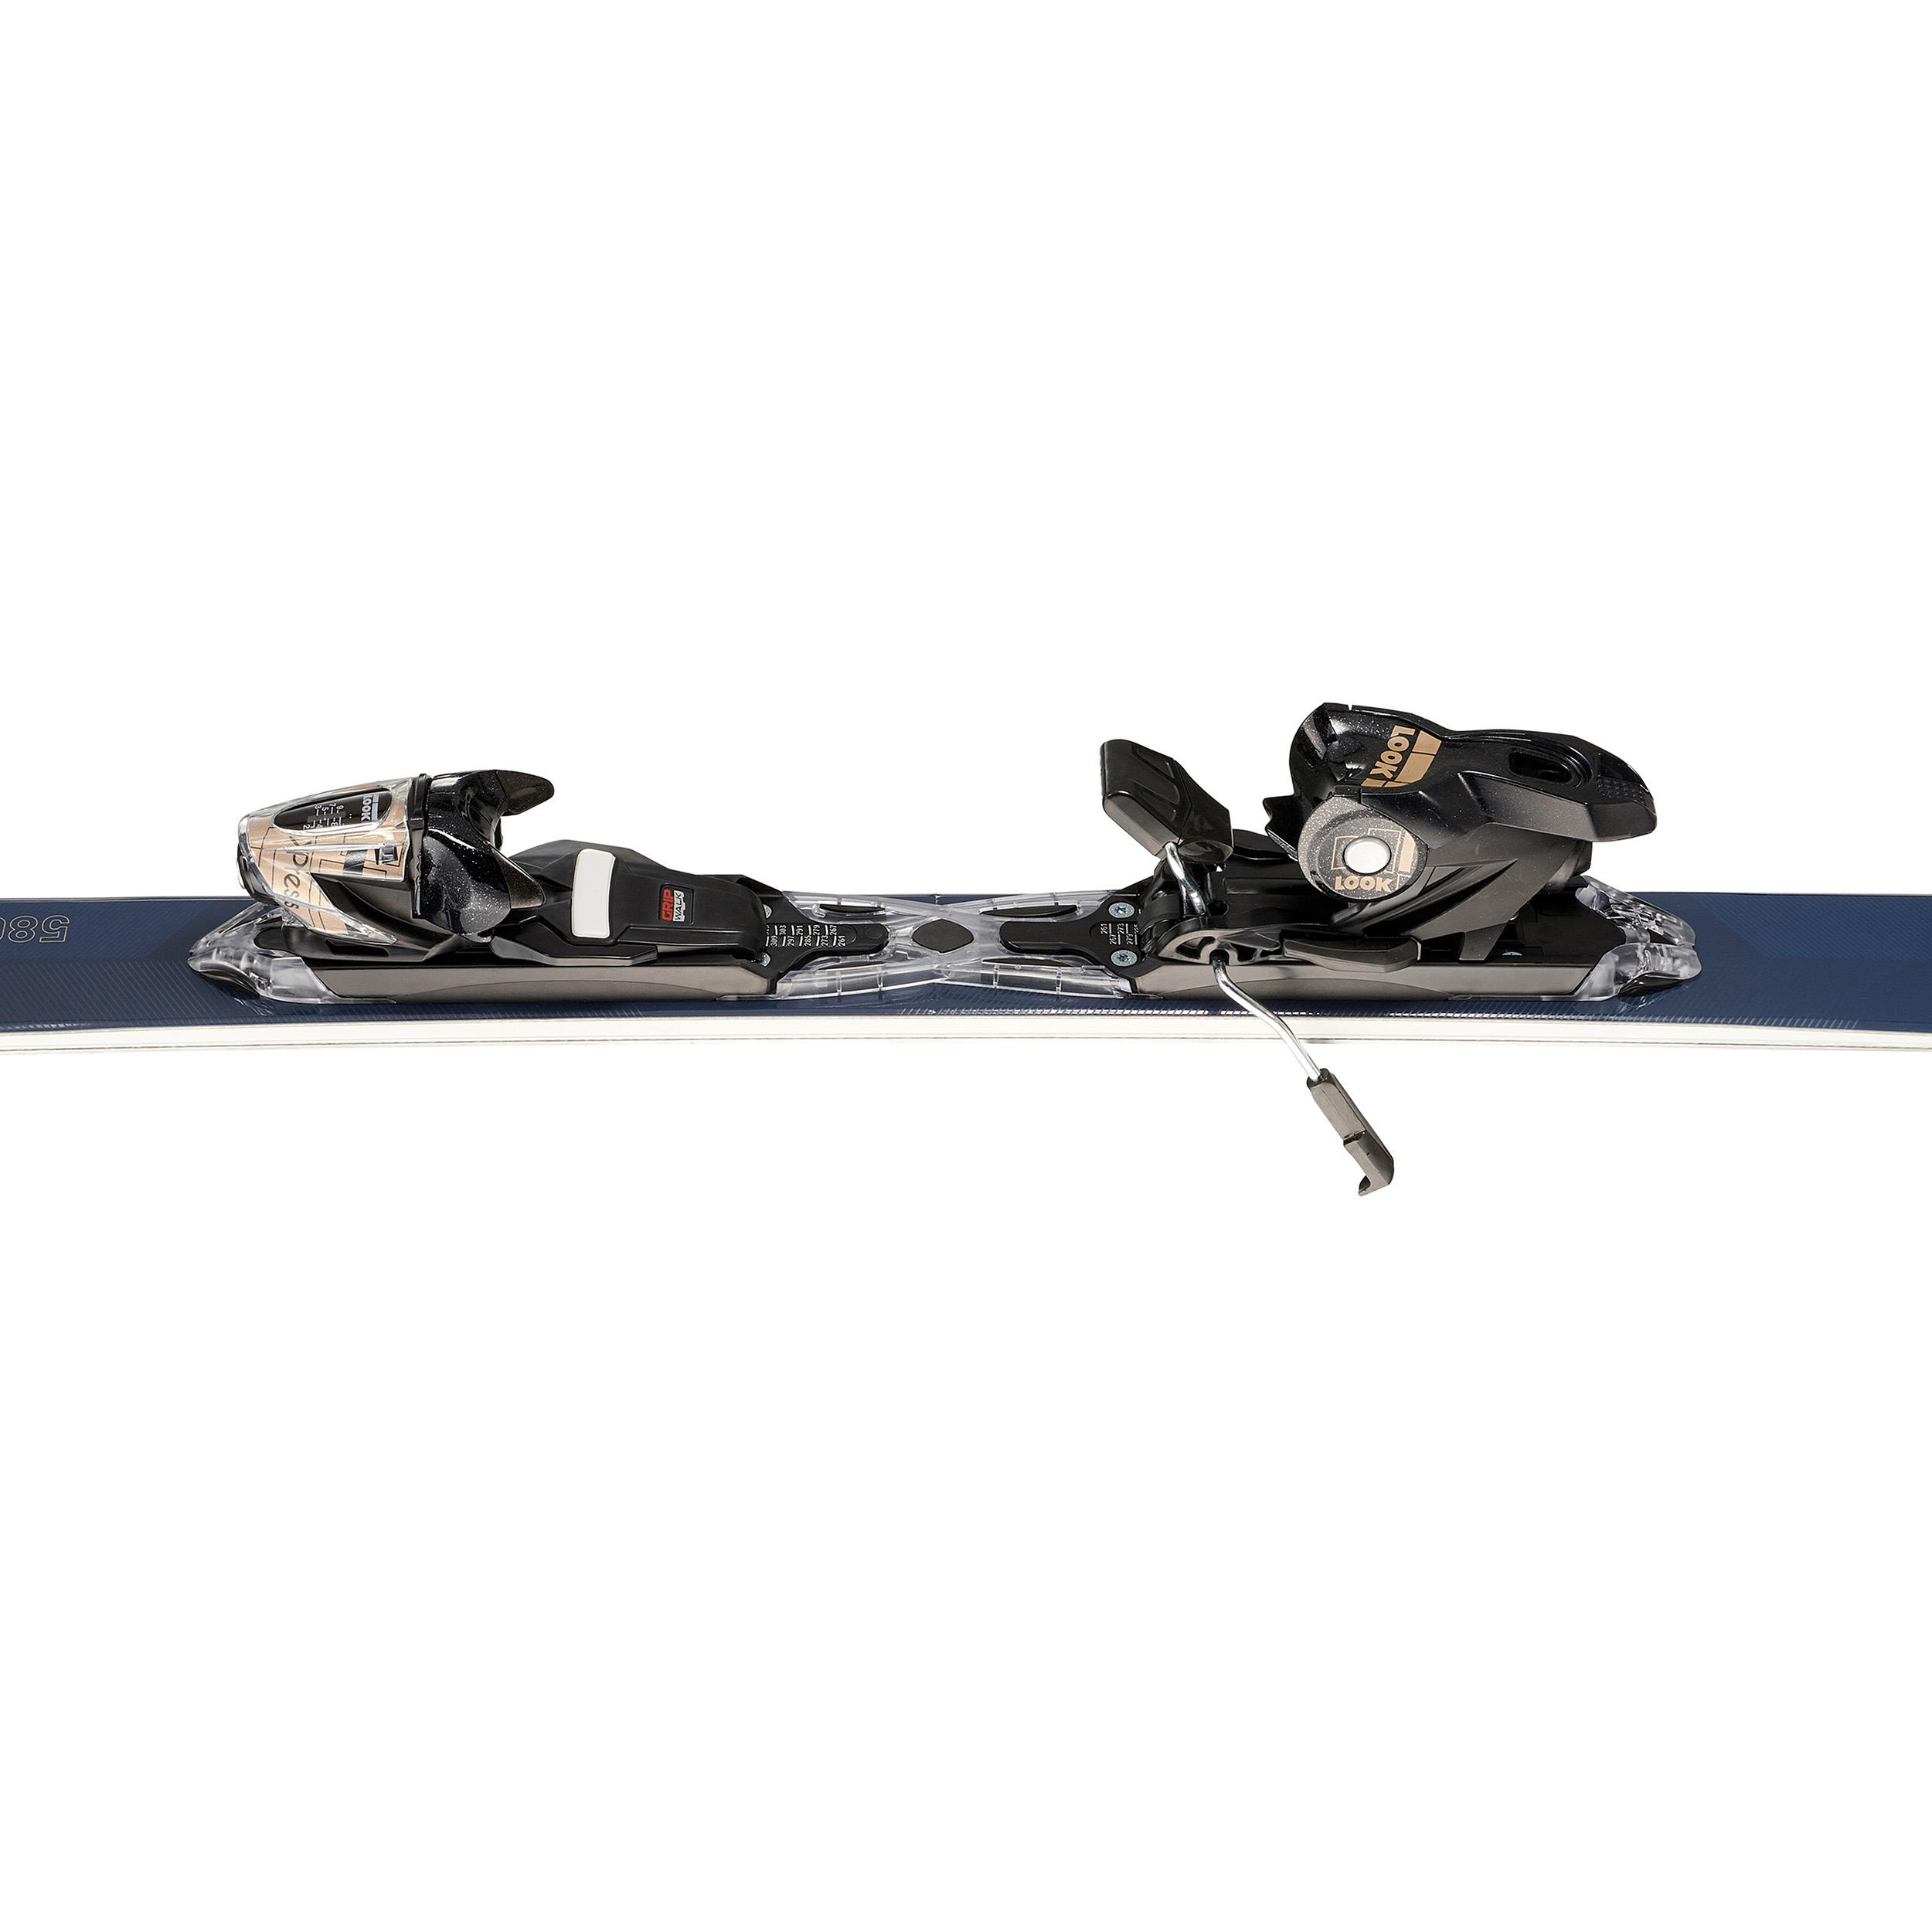 WOMEN’S ALPINE SKIS WITH BINDING - BOOST 580 - NAVY BLUE 6/7